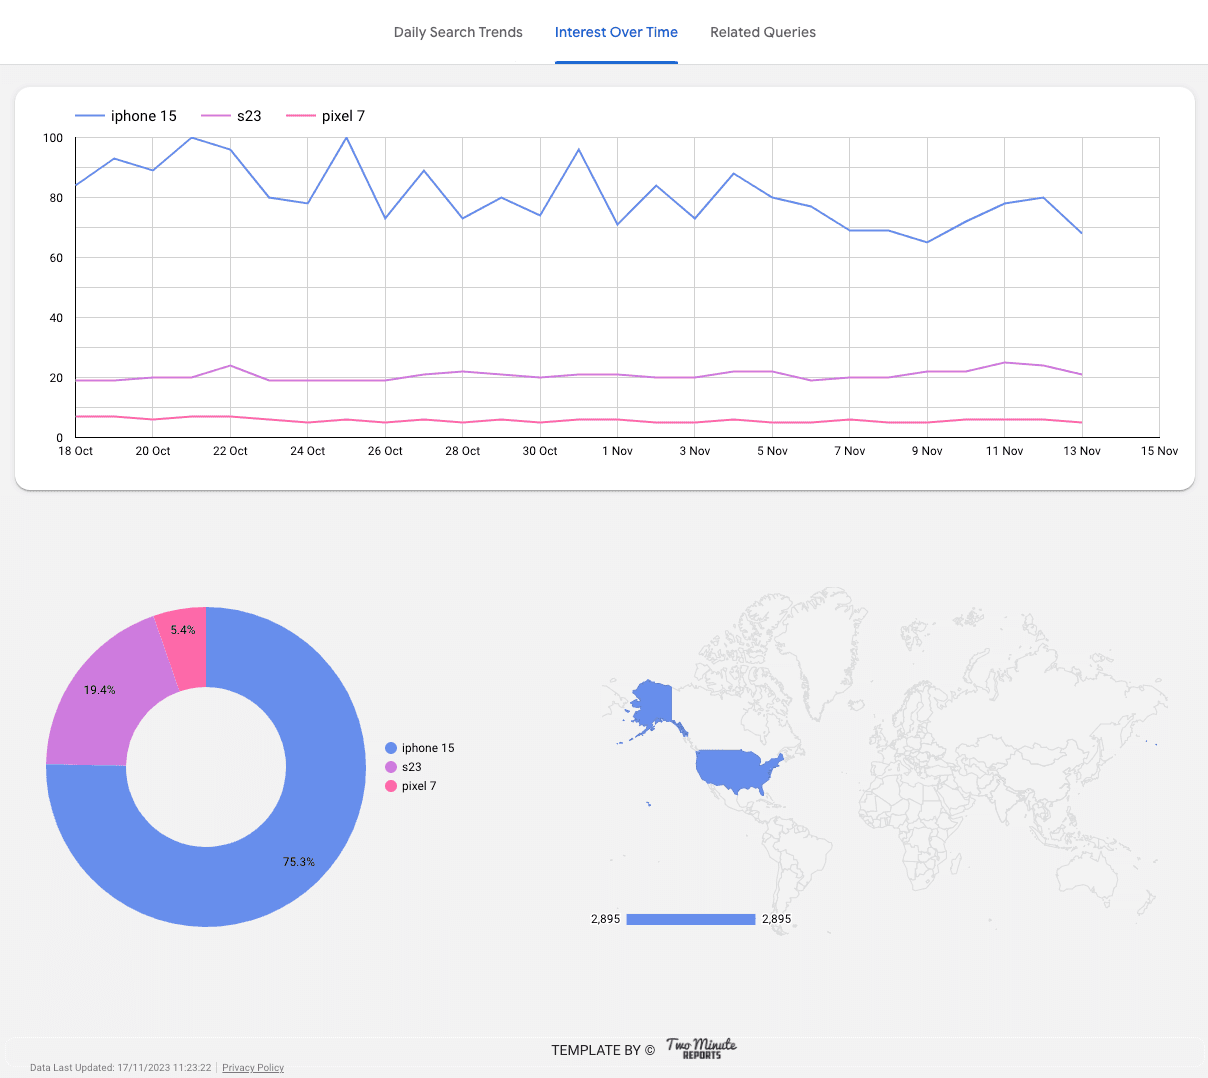 Google Trends - DST, IOT and Related Queries